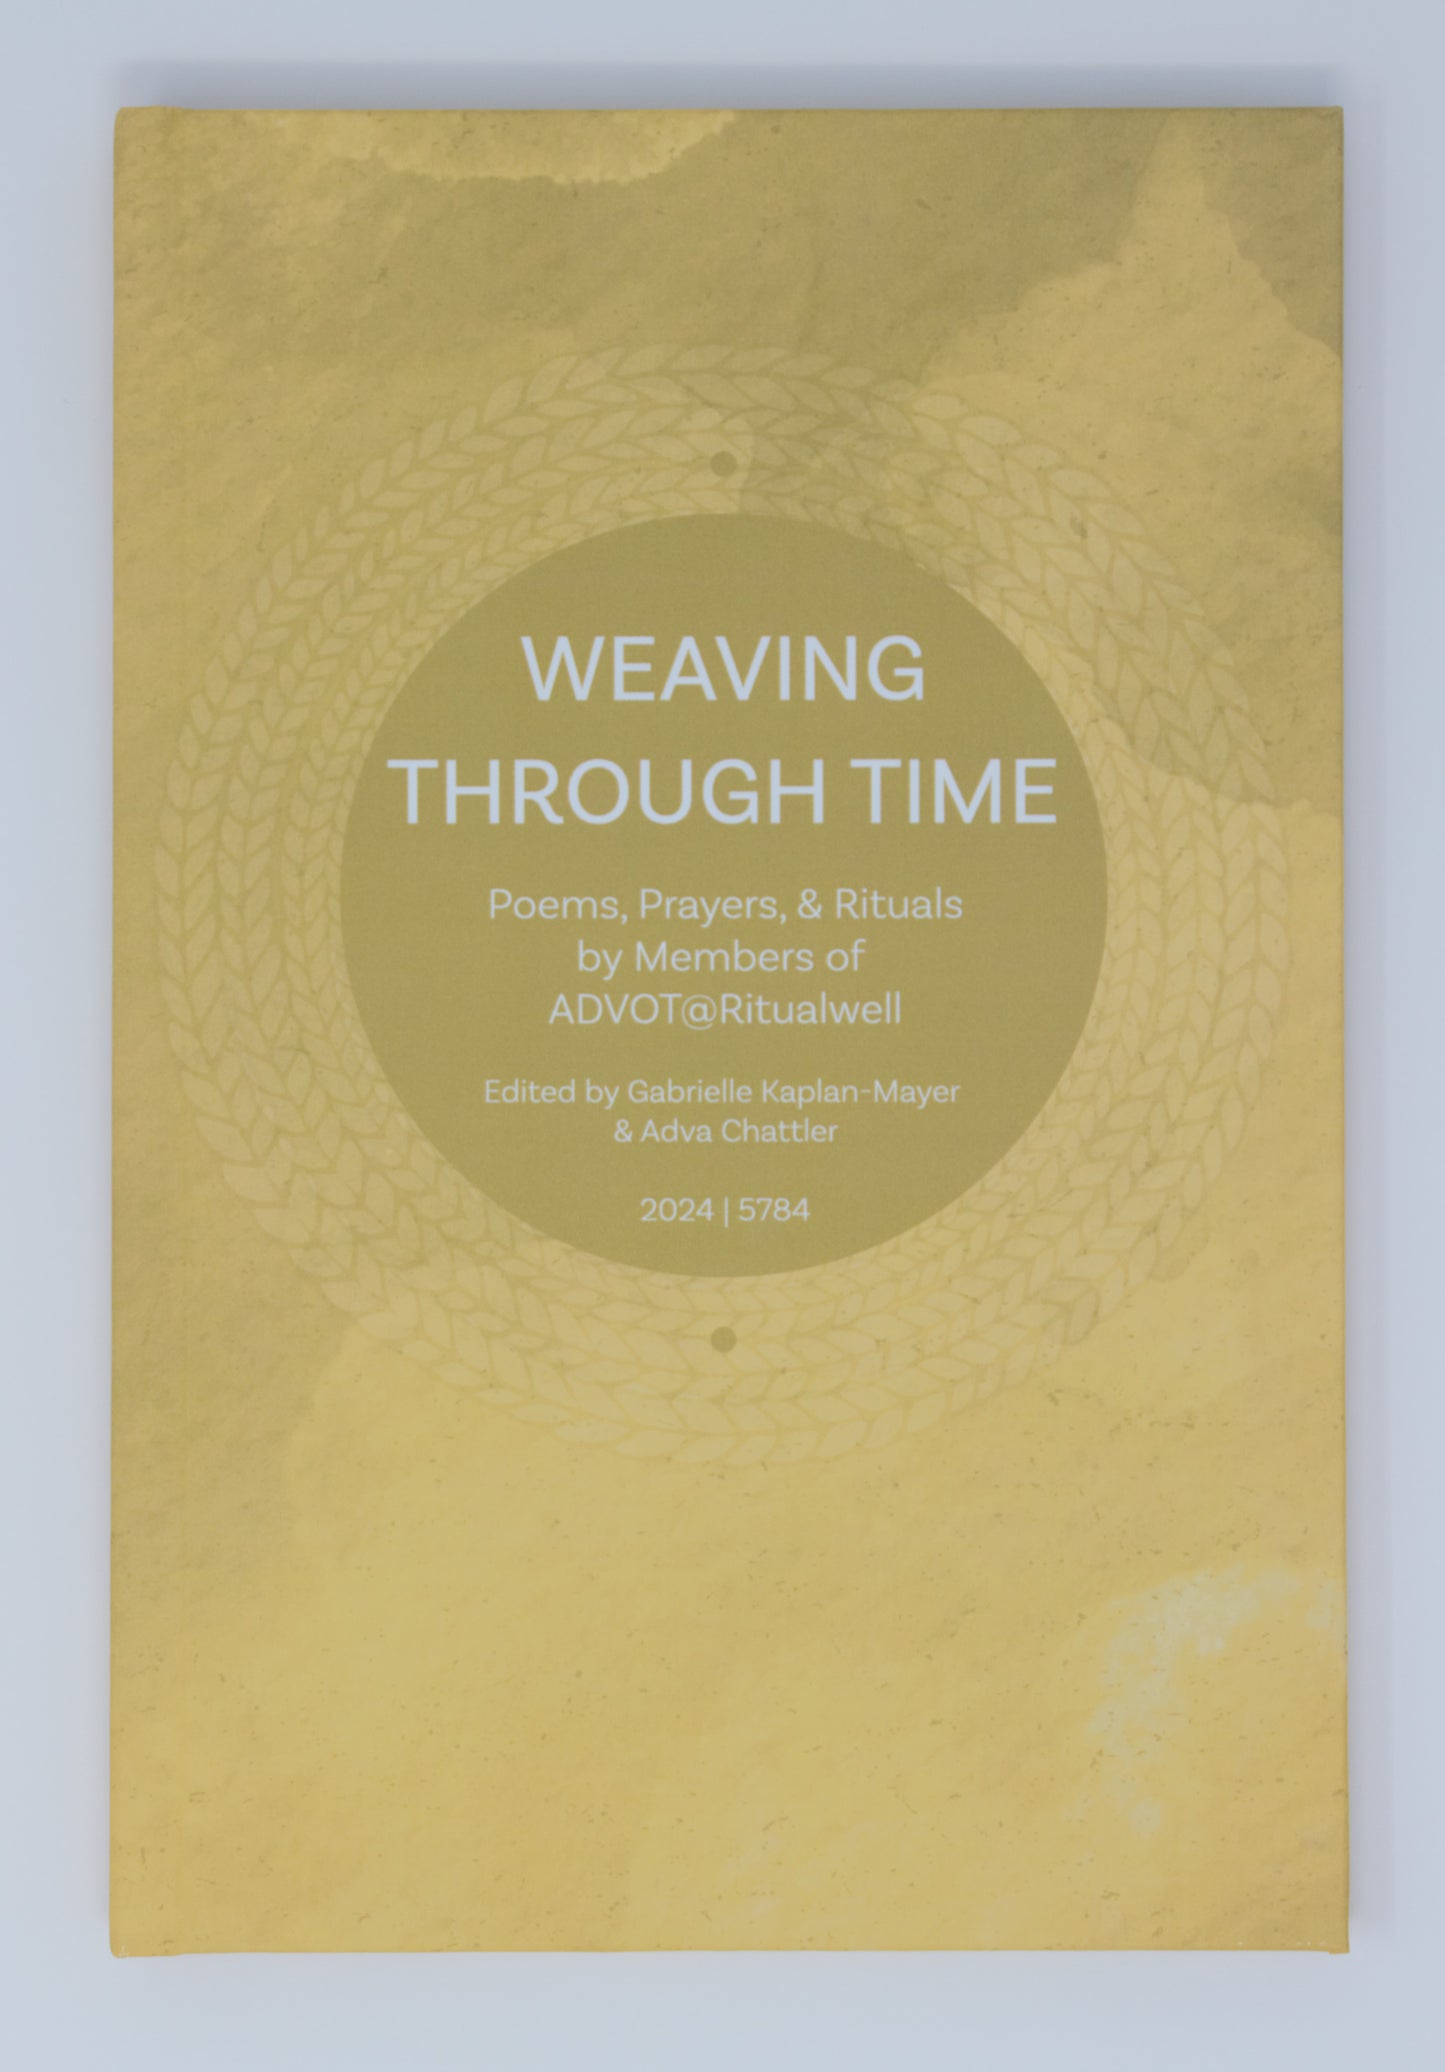 Weaving Through Time: Poems, Prayers, & Rituals by Members of ADVOT@Ritualwell (2024/5784)